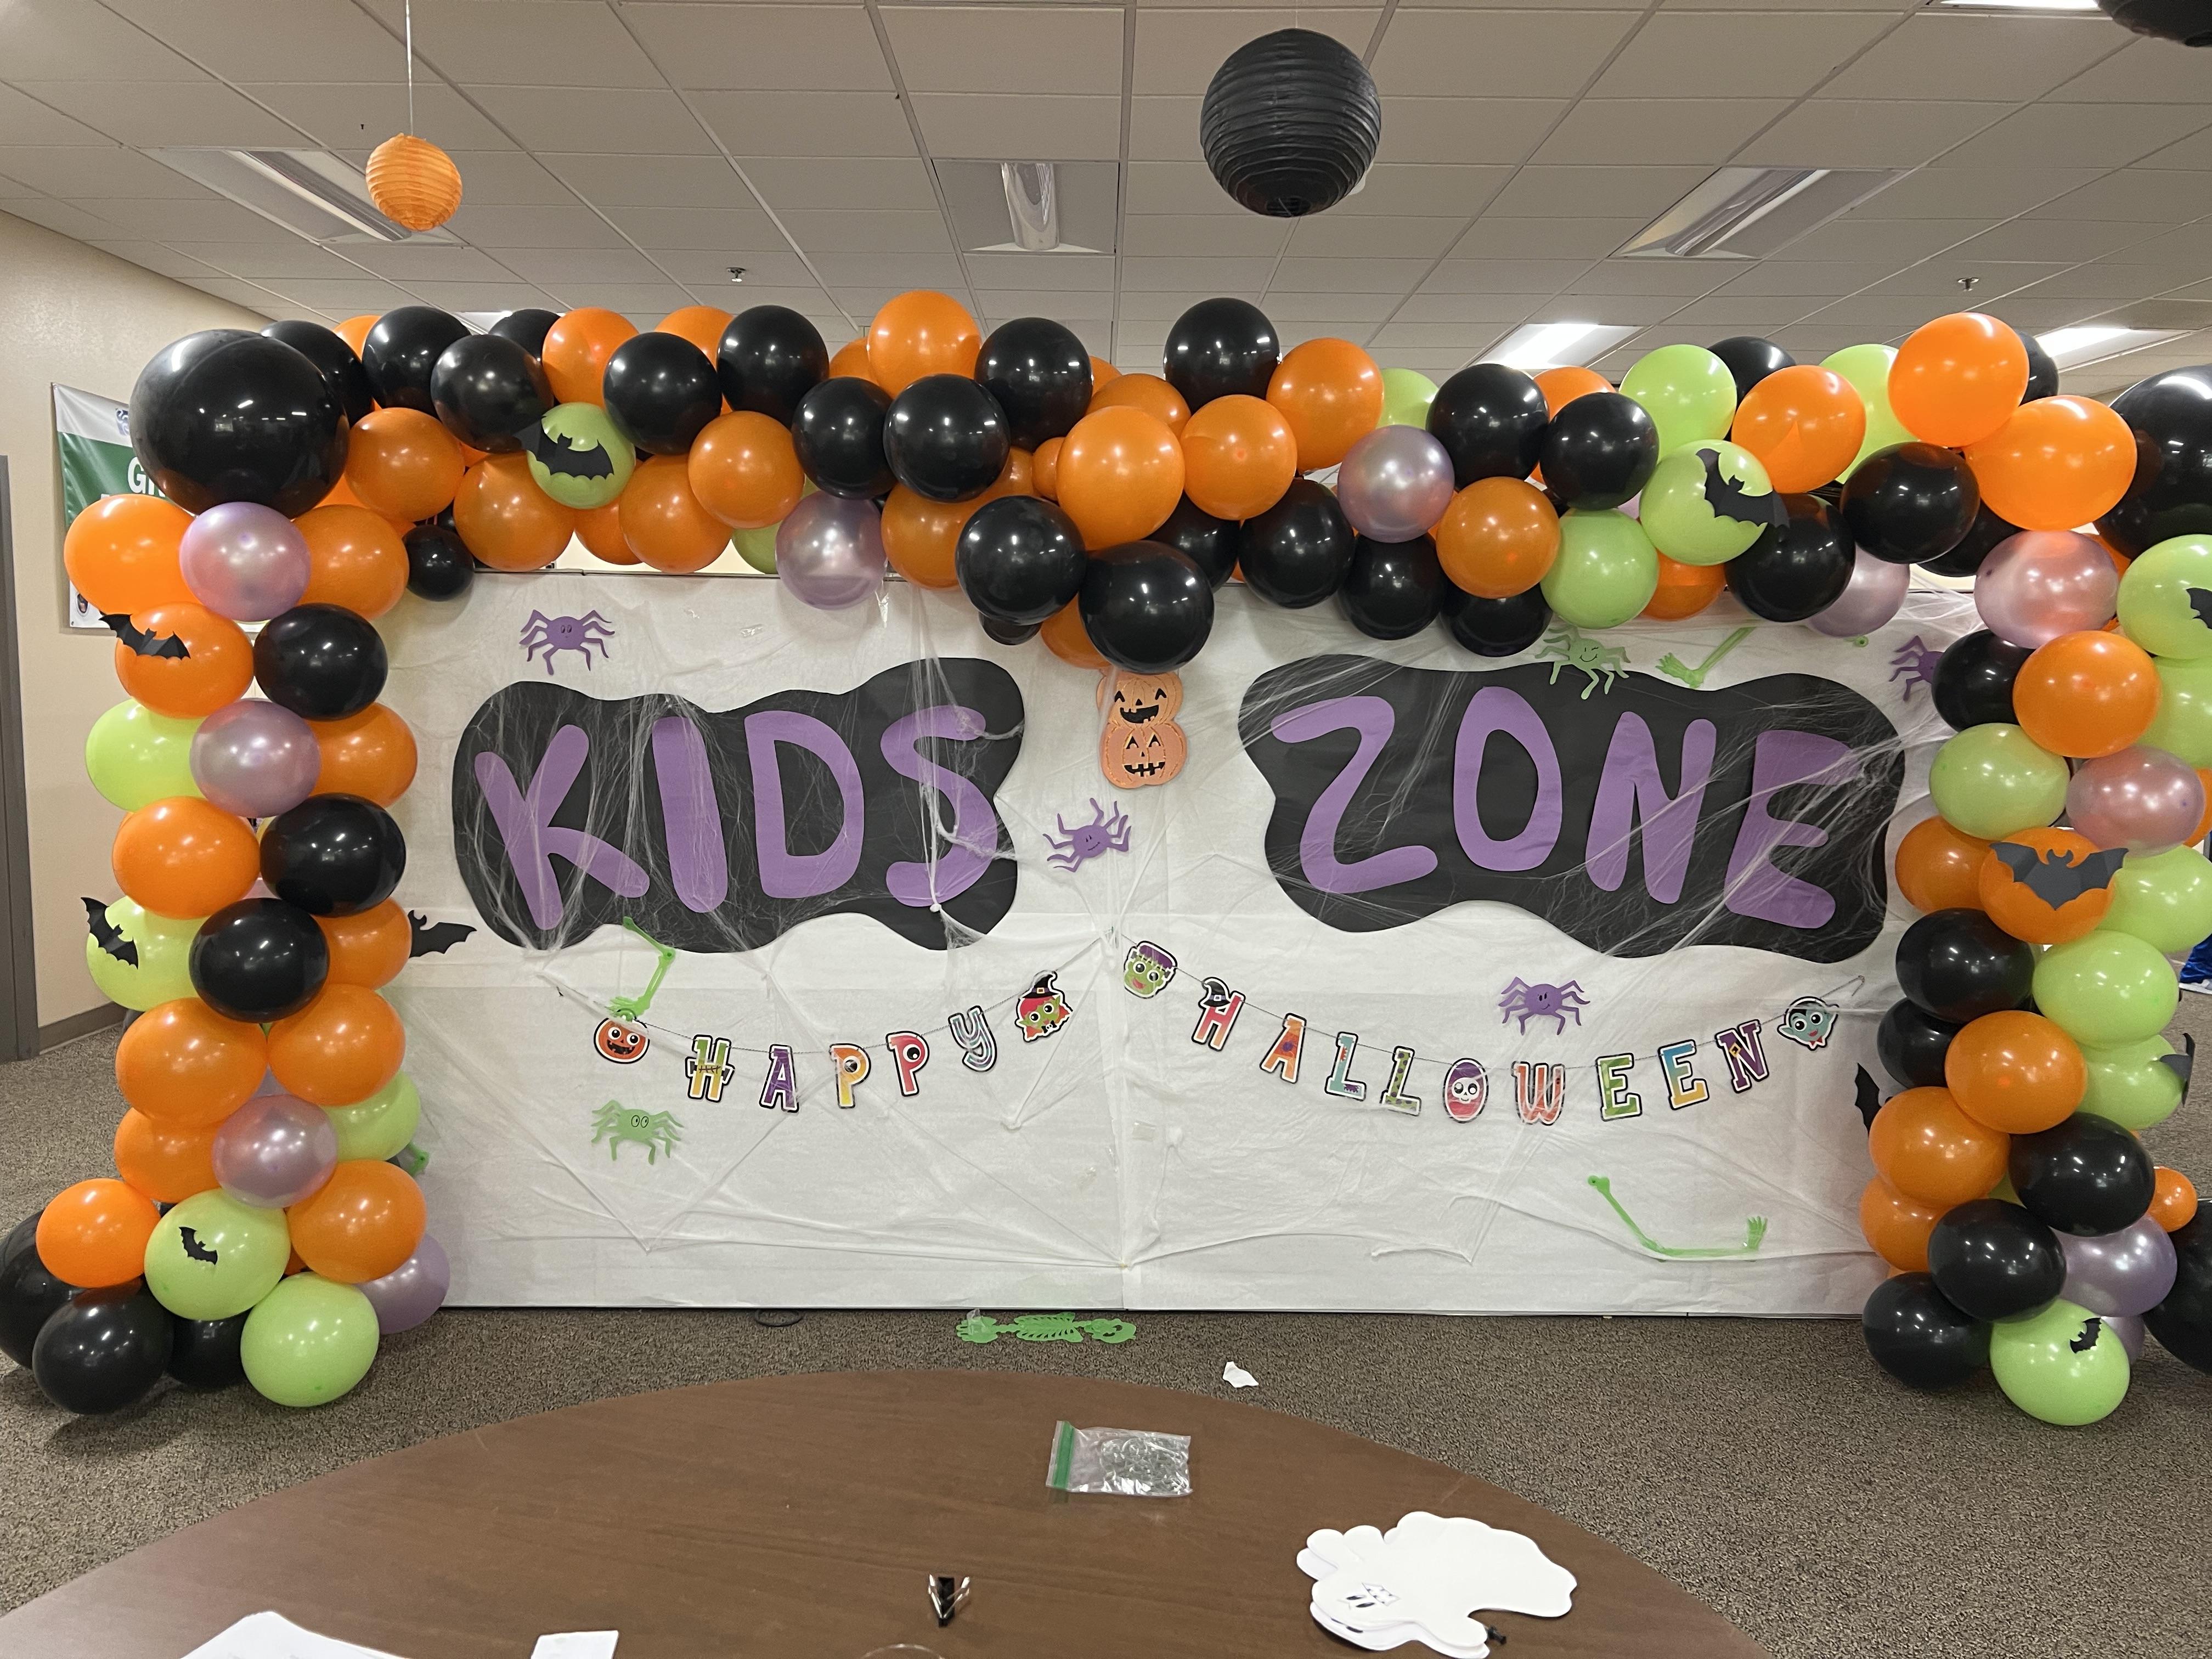 the Kid Zone decorated with balloons